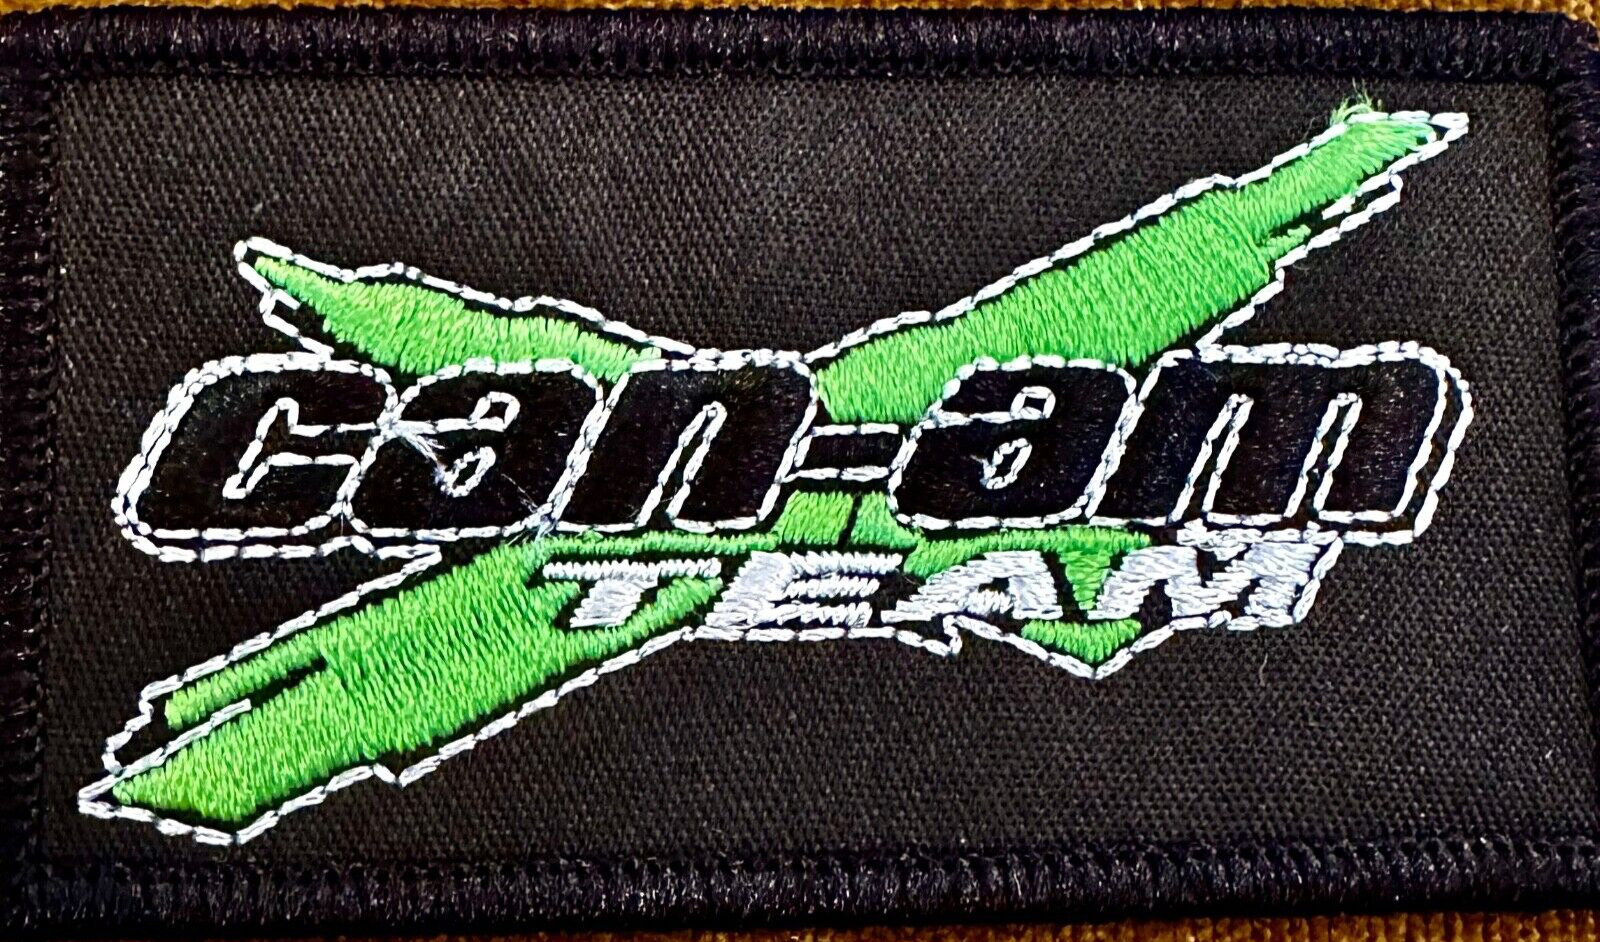 SPLENDID CAN-AM RACING TEAM EMBROIDERED IRON-ON PATCH...